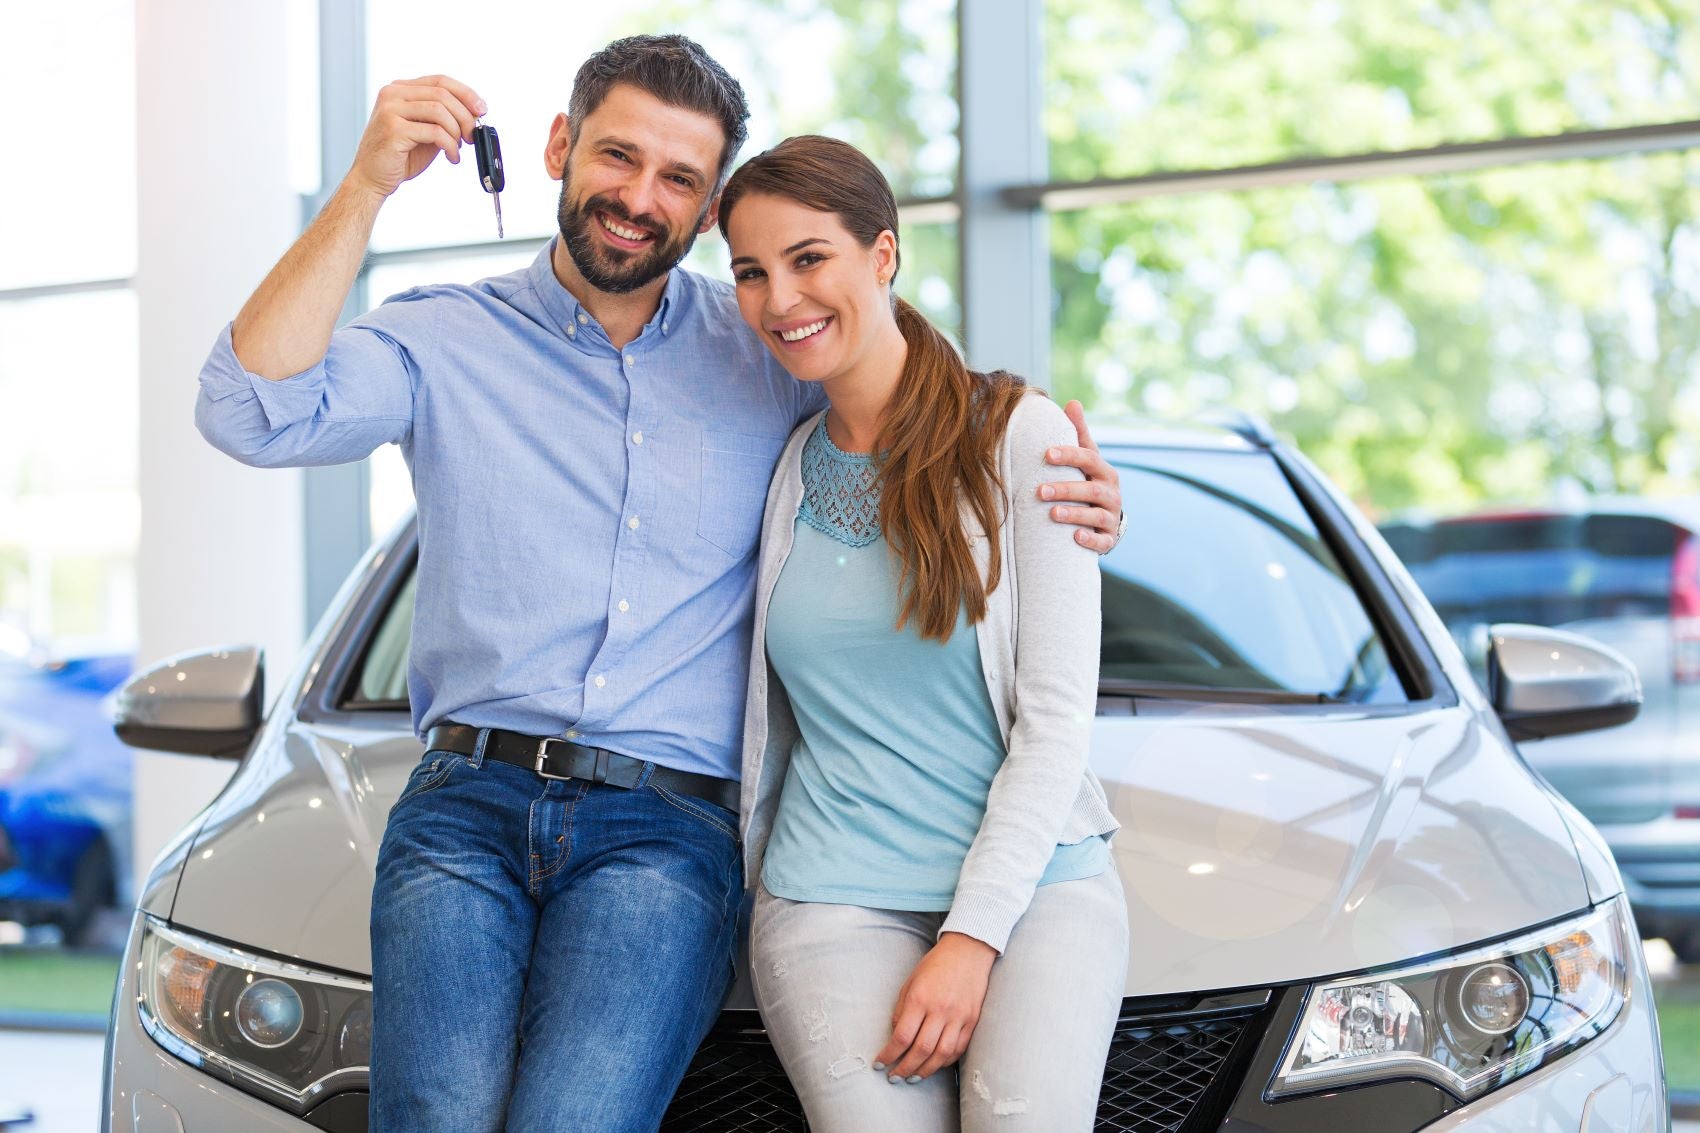 Why Buy a Used Car?